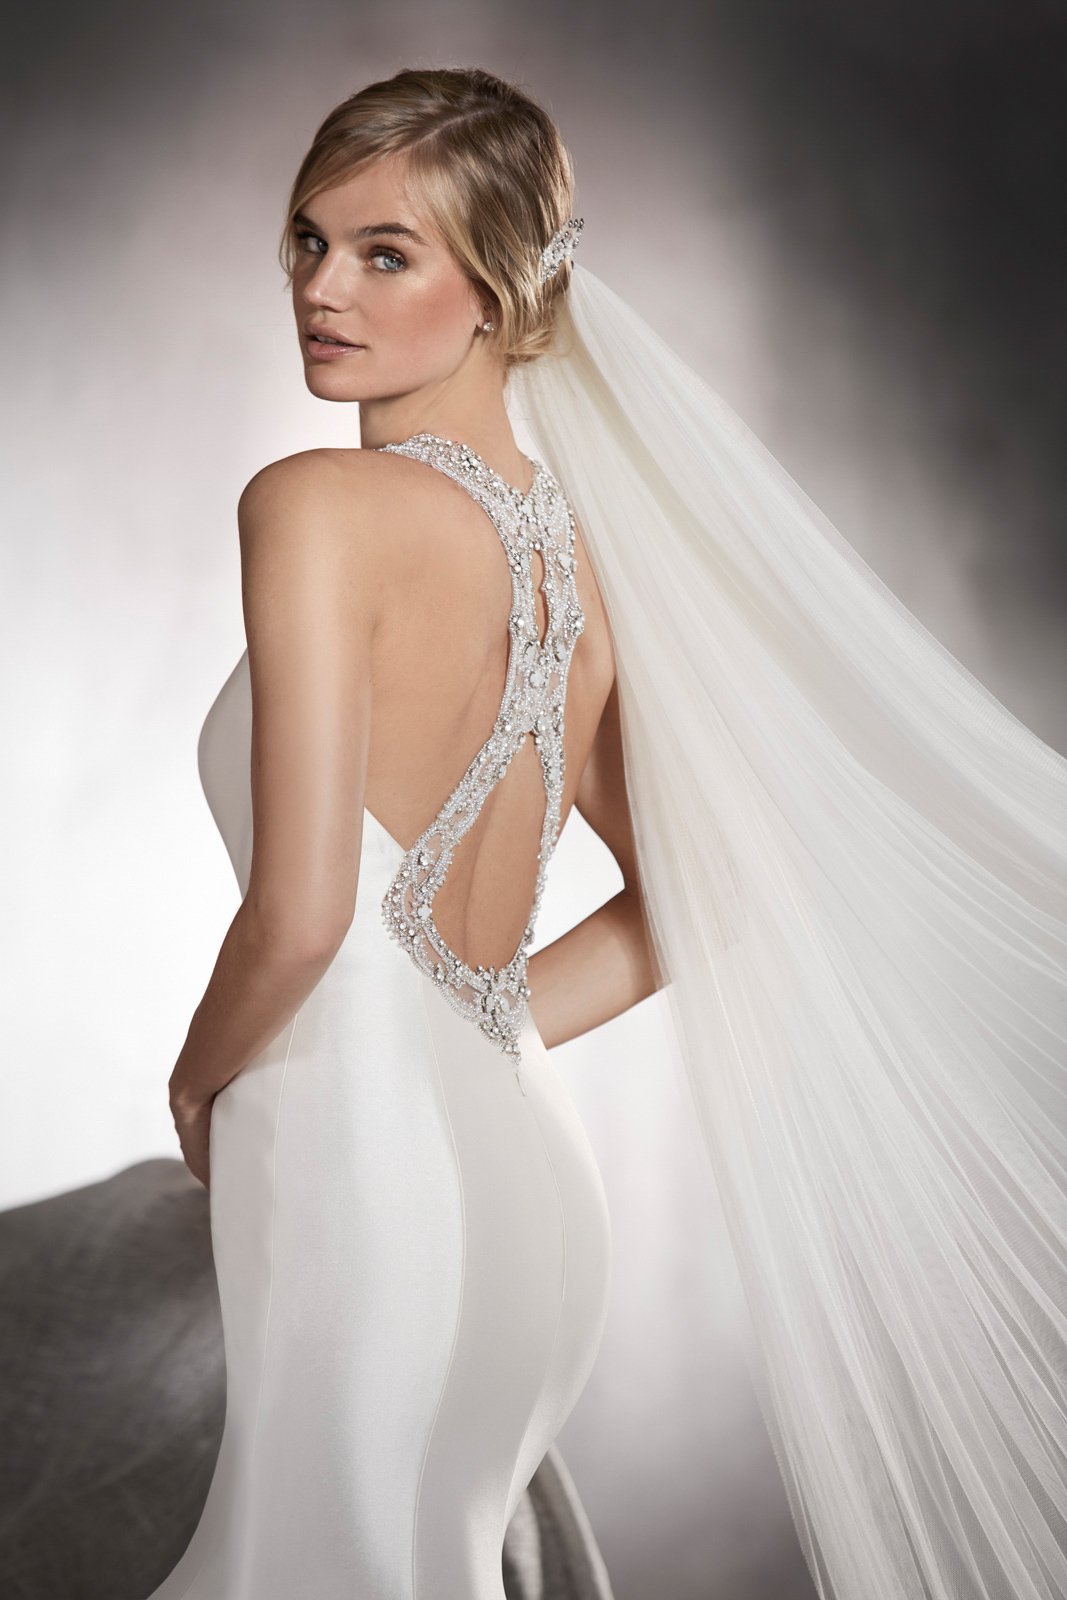 Elegance redefined - the beautiful new 2017 bridal collections from Pronovias.